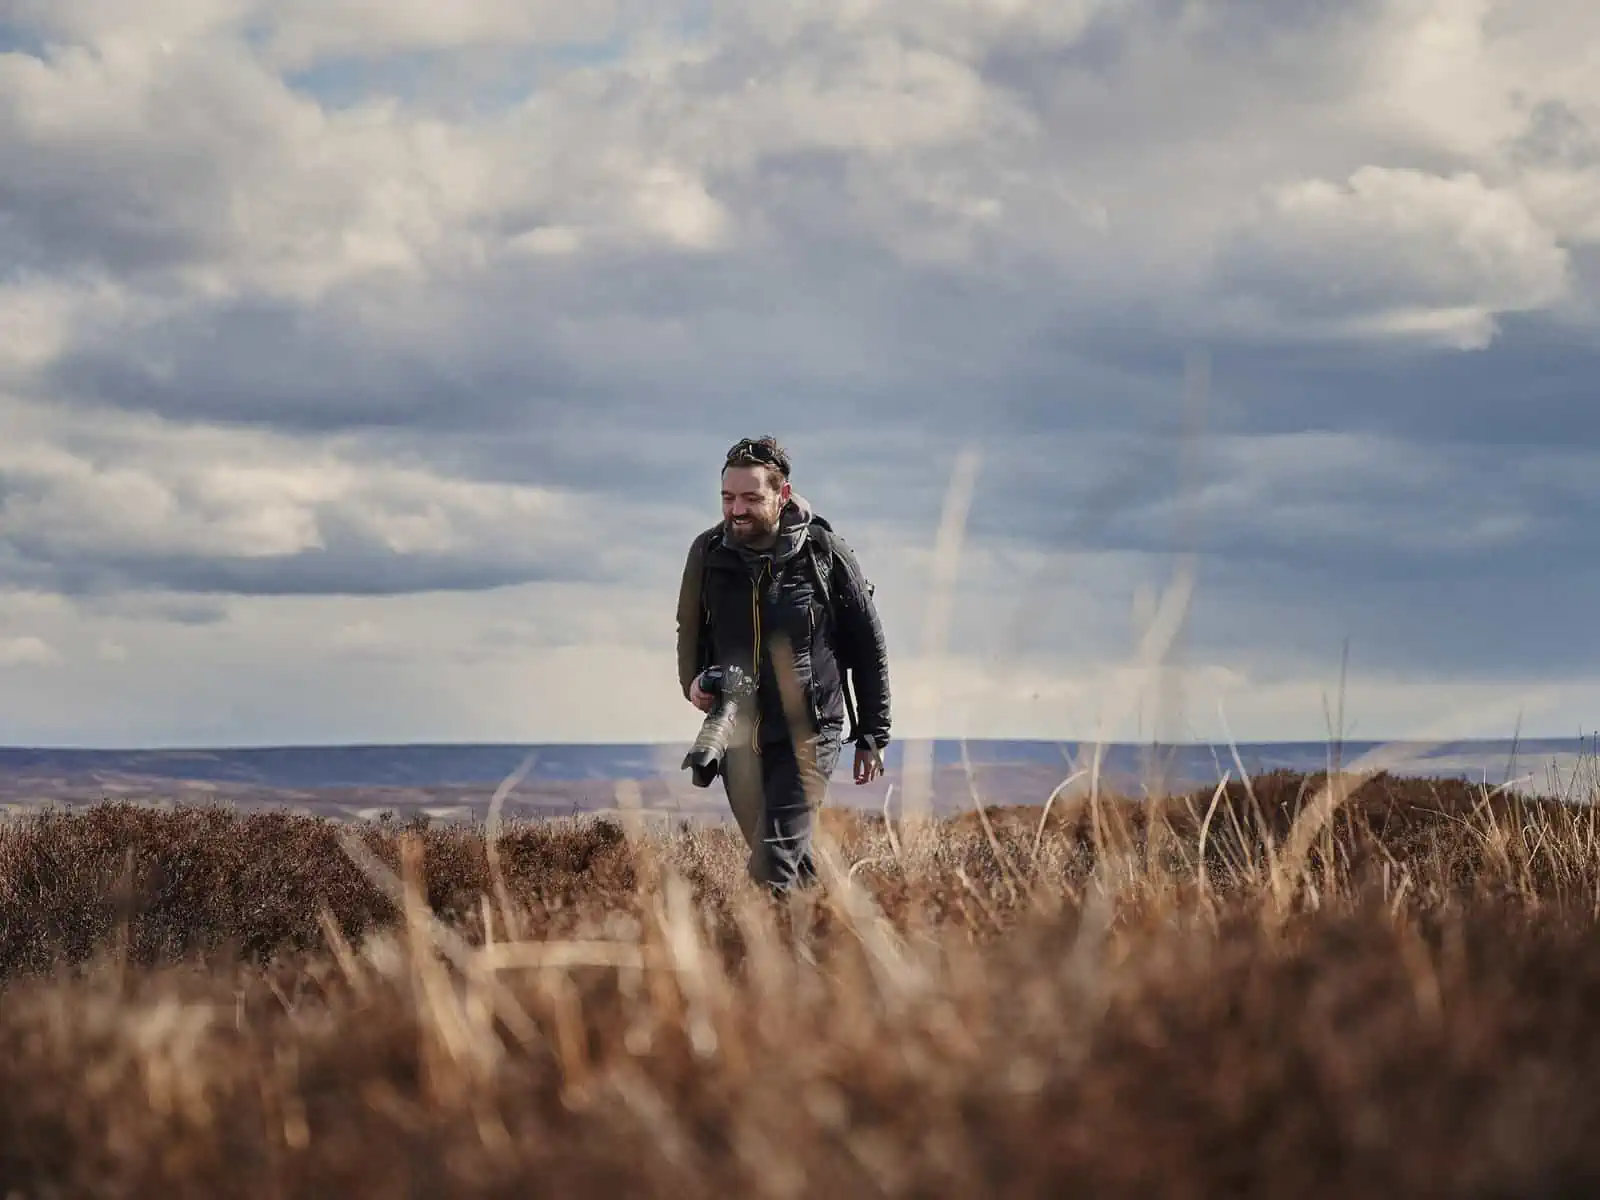 Image description: A landscape image. Matt is in the centre of the frame and is walking forward with the gaze slightly to the left side. Grasses in the bottom third of the frame are obfuscating his legs, and these are brown and yellow in colour. Matt wears a mostly black outfit and is carrying a camera with a long lens. In the background there are hills and a dramatic blue sky takes over more than half of the frame.